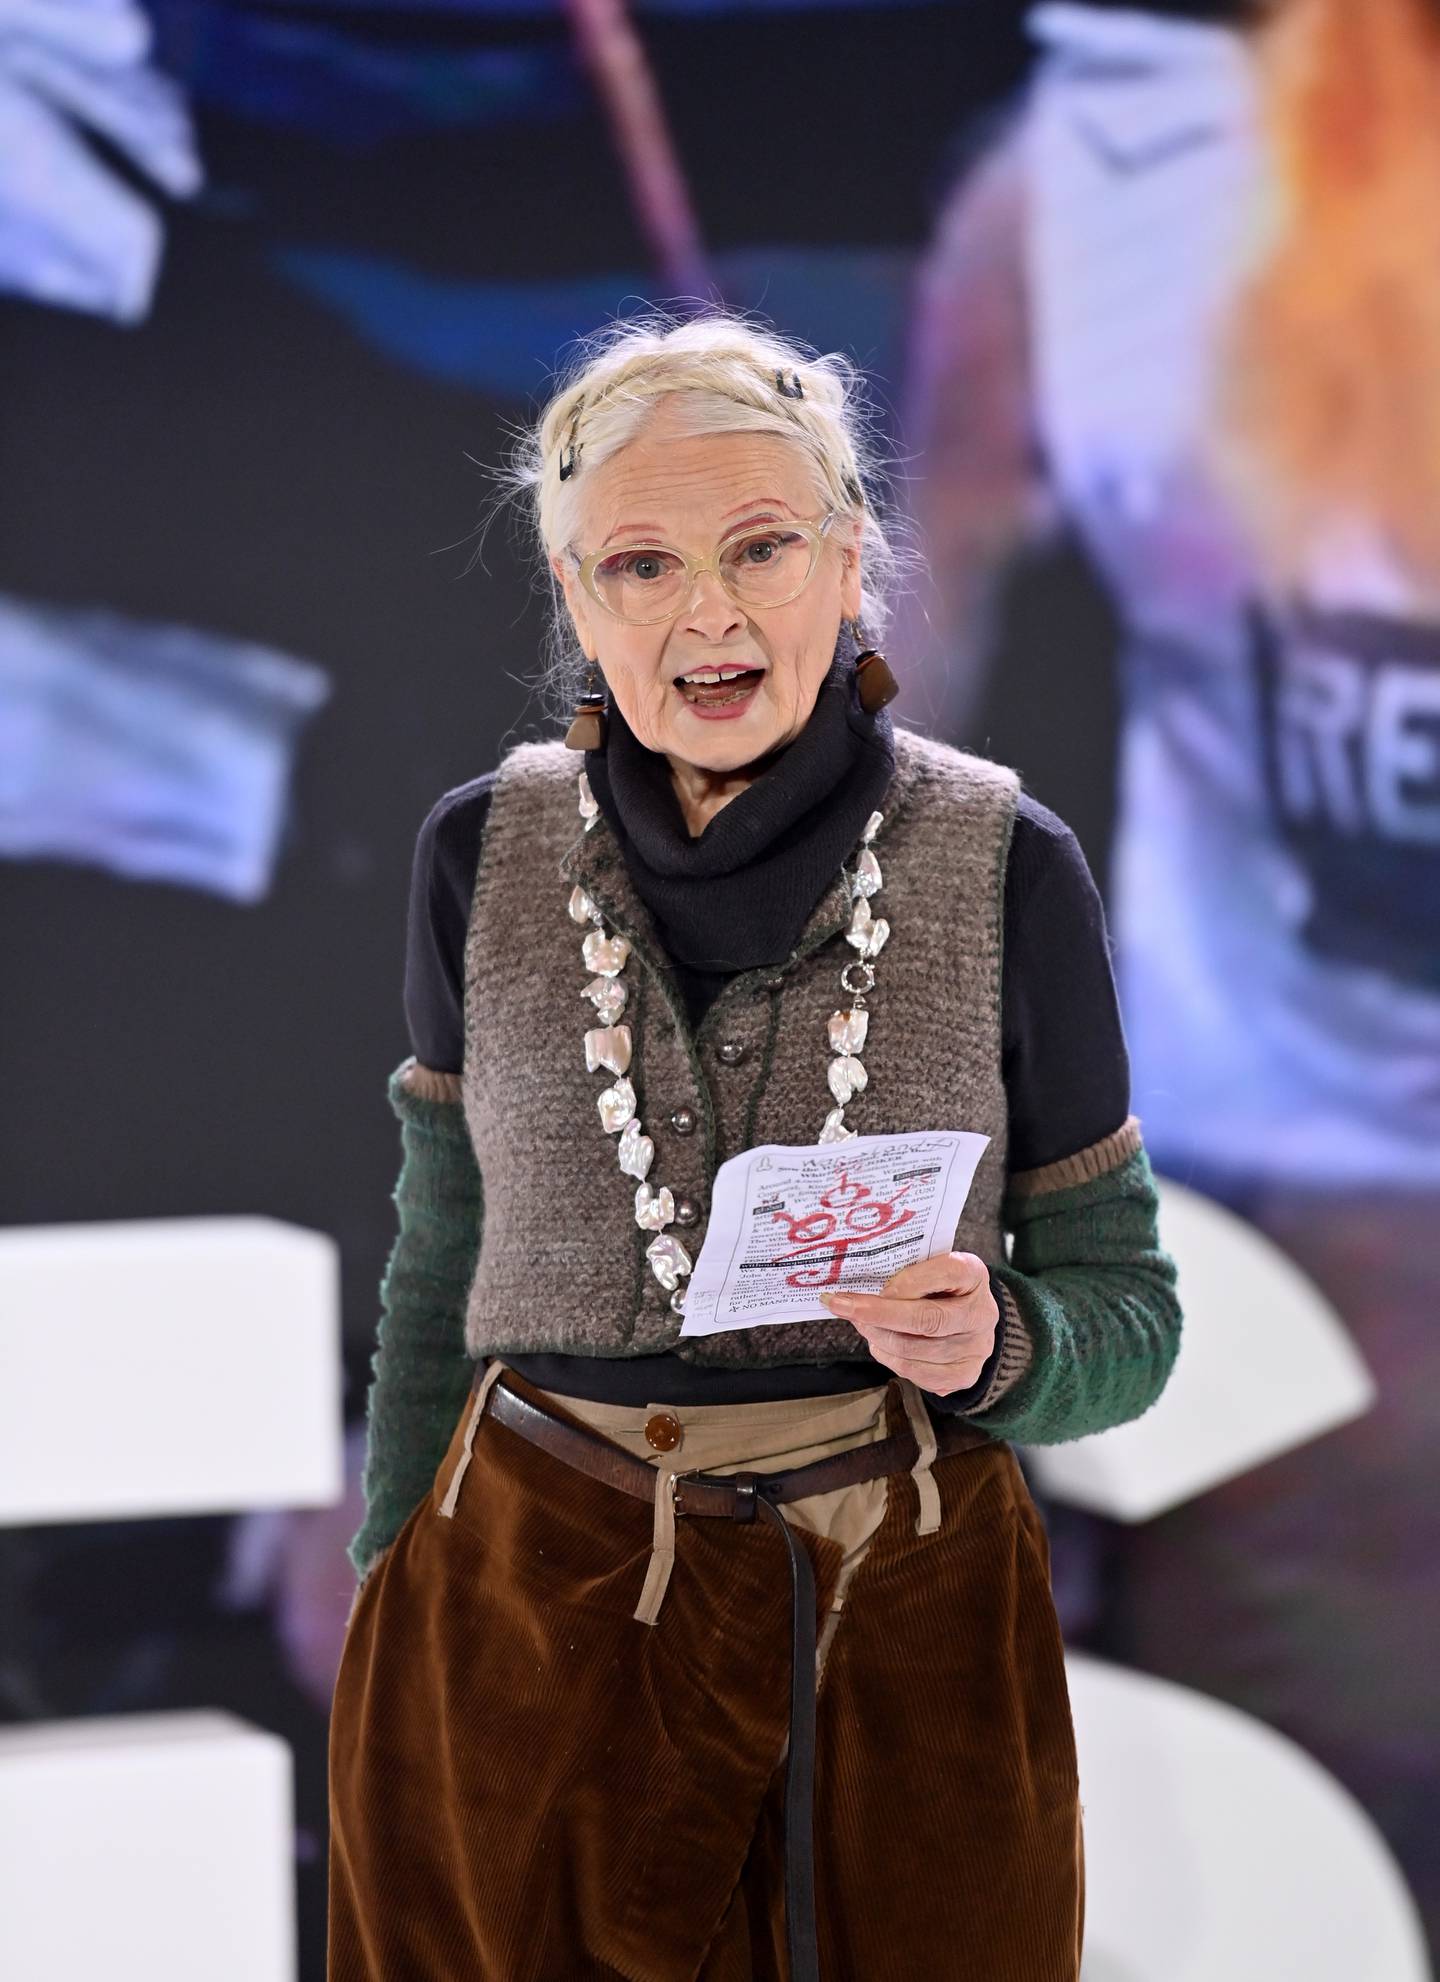 OXFORDSHIRE, ENGLAND - DECEMBER 01: In this image released on December 2nd, Dame Vivienne Westwood speaks during BoF VOICES 2021 at Soho Farmhouse on December 01, 2021 in Oxfordshire, England. (Photo by Samir Hussein/Getty Images for BoF VOICES)